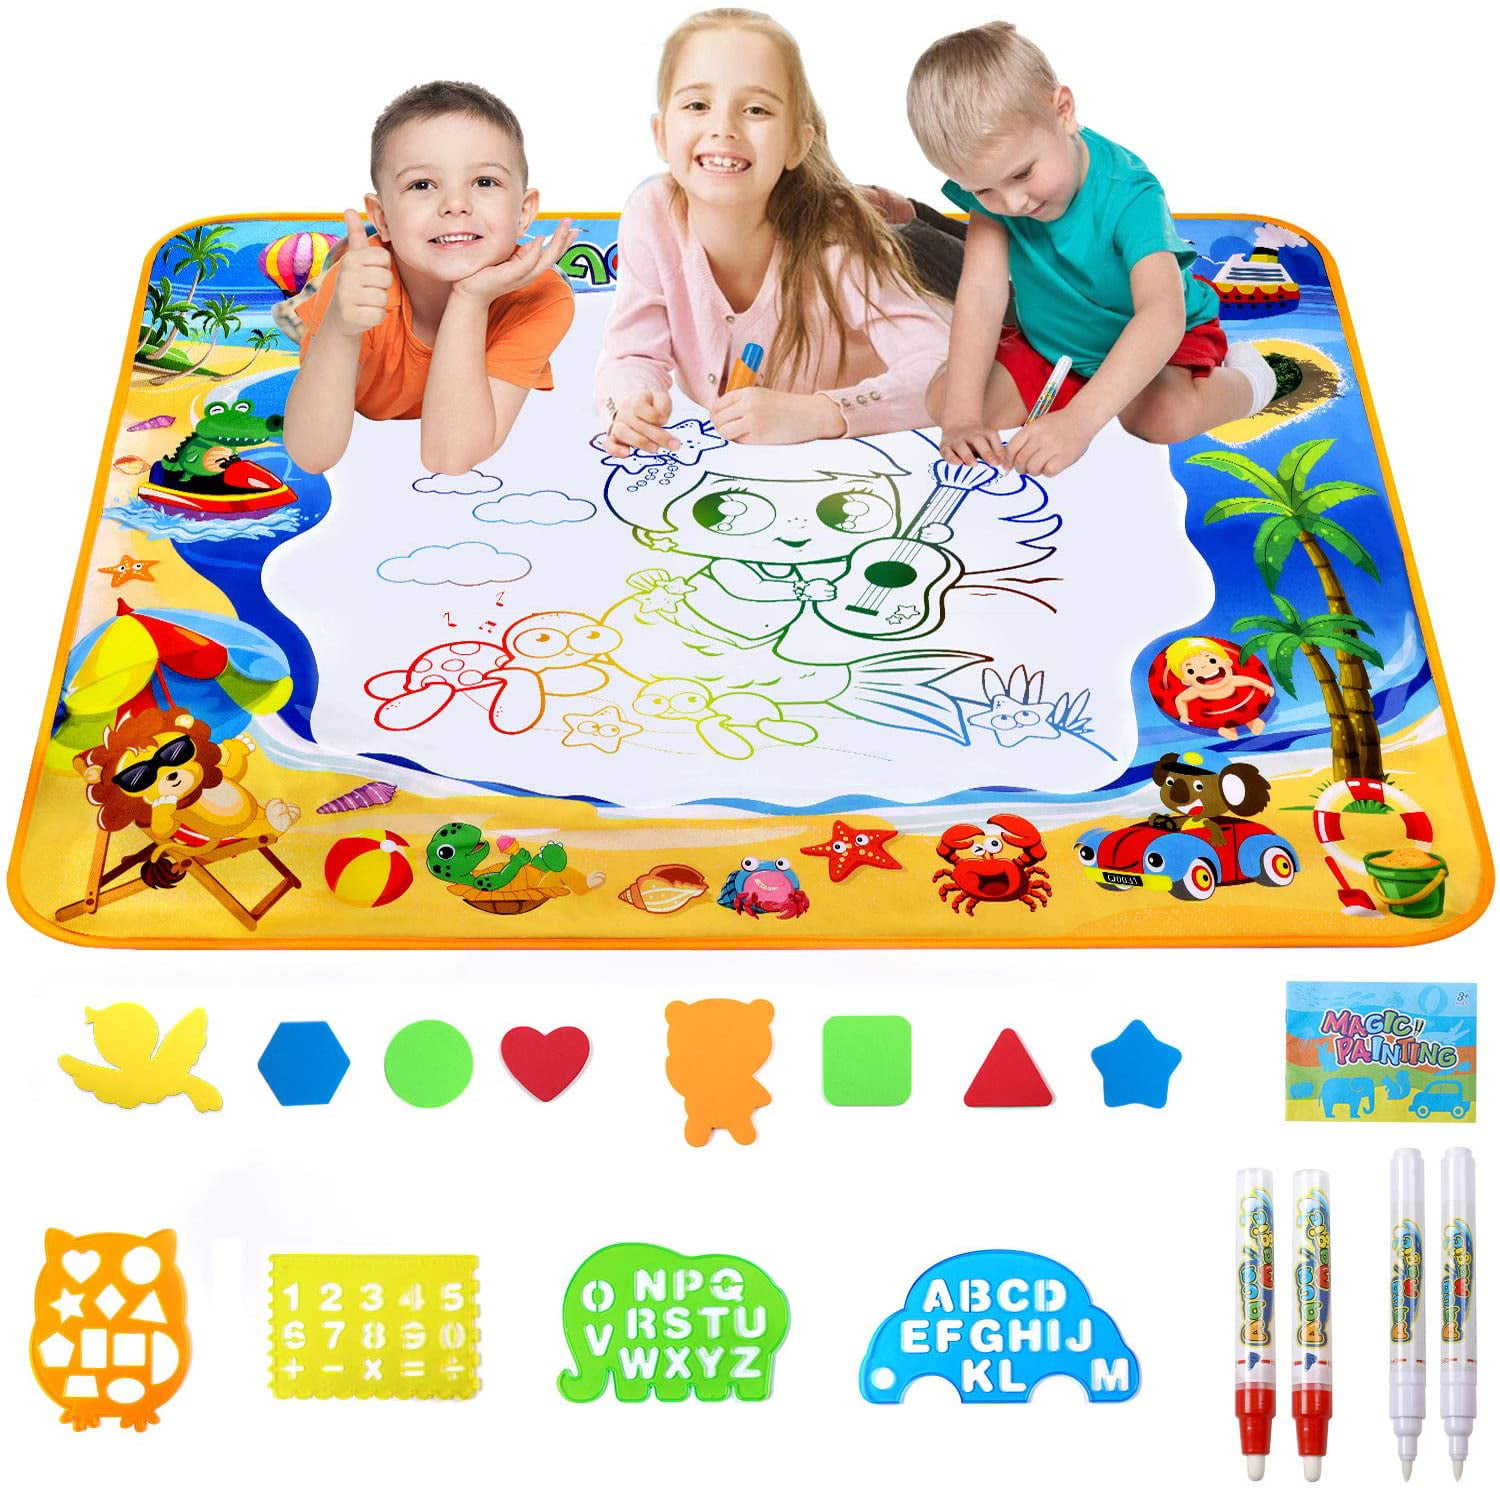 Water Doodle Board Drawing Mat Toys for 2 3 4 5 6 7 Years Old Baby Boys Girls Painting Writing Magic Mat with Pens Kids Education Learning Toys for Toddler Toys Gifts Age 2-4 